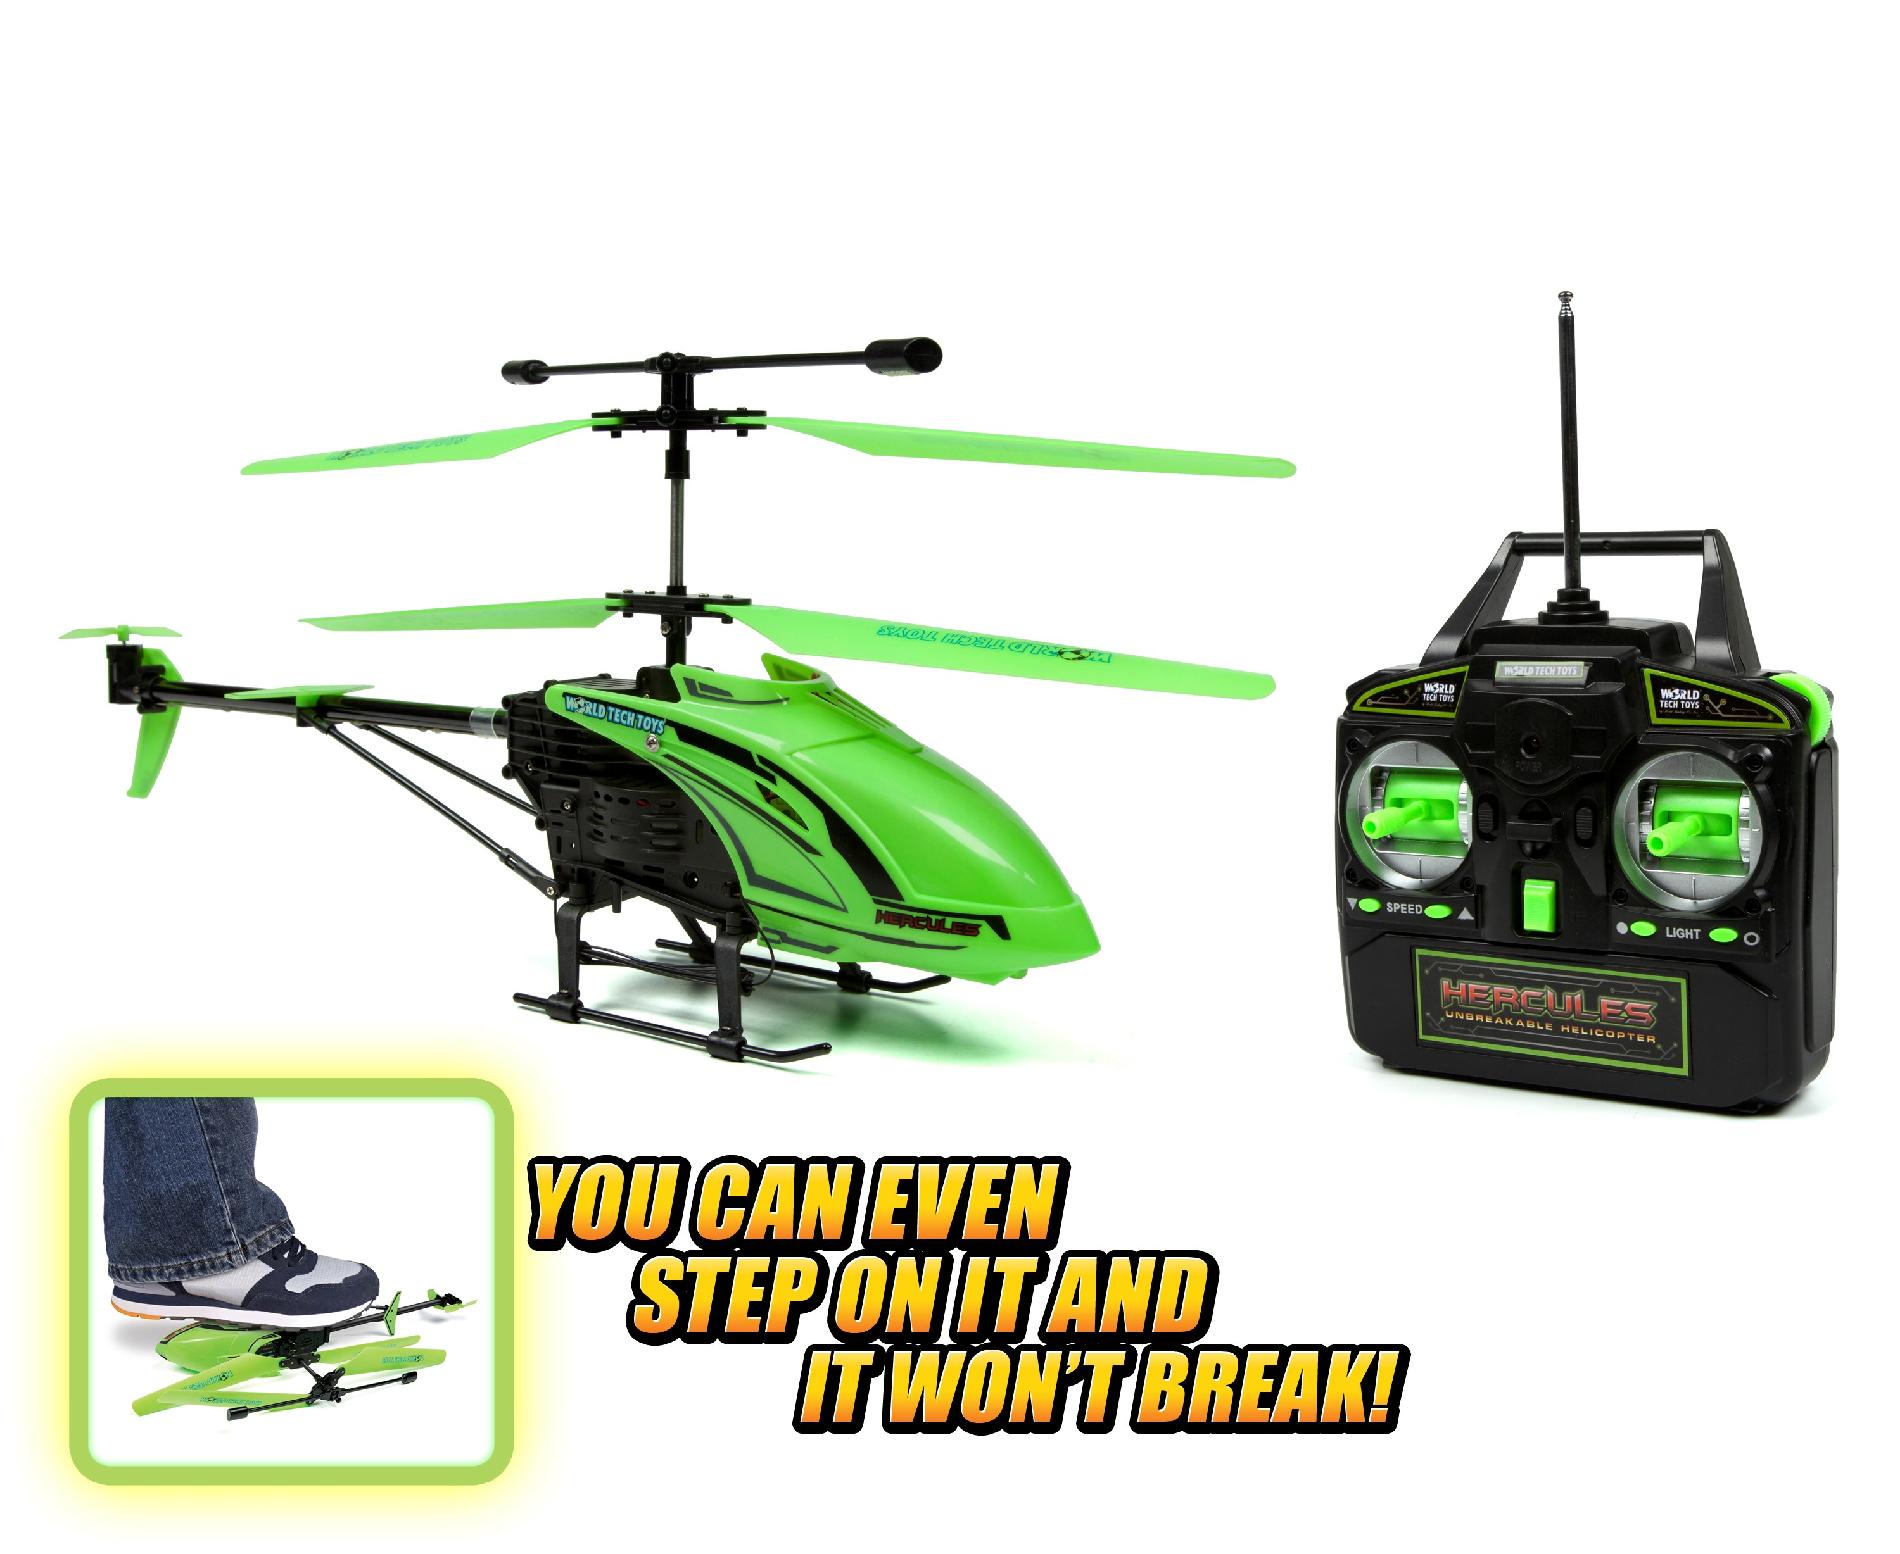 0813023018217 - 3.5CH GYRO GLOW IN THE DARK HERCULES UNBREAKABLE REMOTE CONTROL HELICOPTER